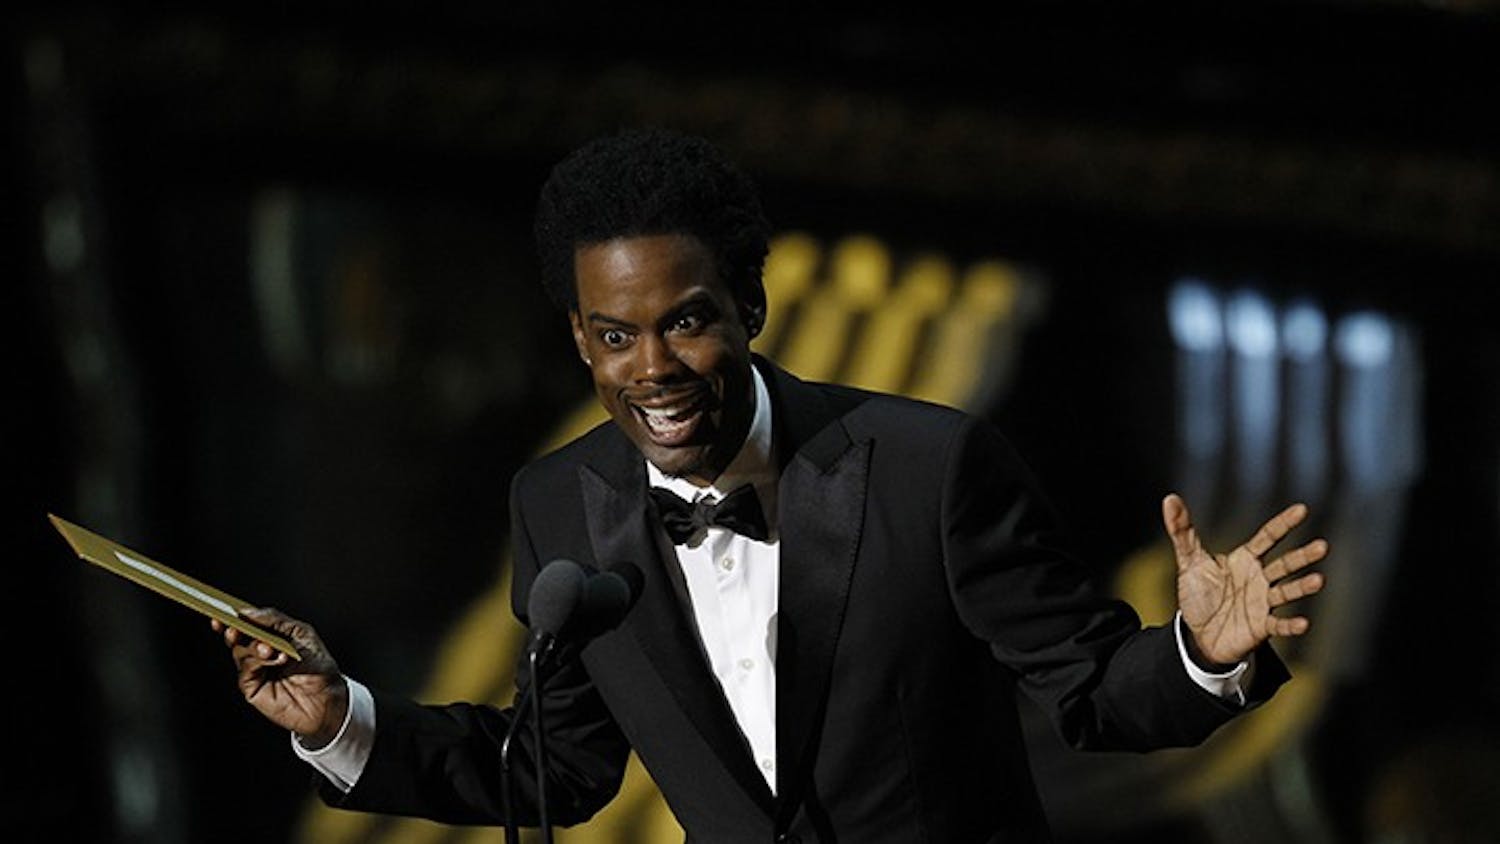 Presenter Chris Rock on stage at the 84th Annual Academy Awards show at the Hollywood and Highland Center in Los Angeles, California, on Sunday, February 26, 2012. (Robert Gauthier/Los Angeles Times/MCT)